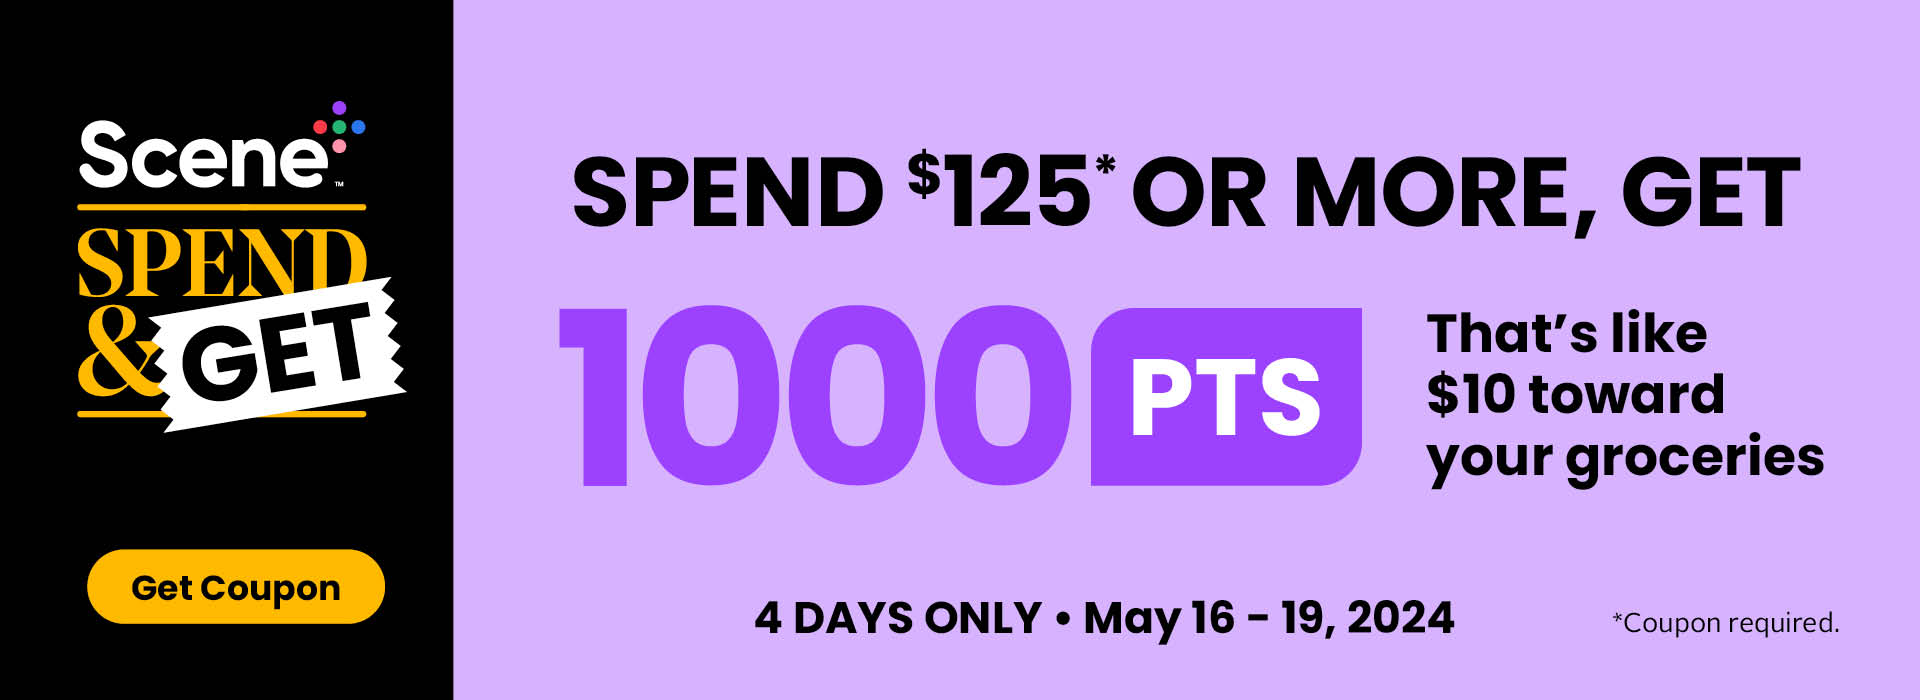 Spend & Get! 4 Days Only! Spend $125 get 1000 PTS. See flyer for more details